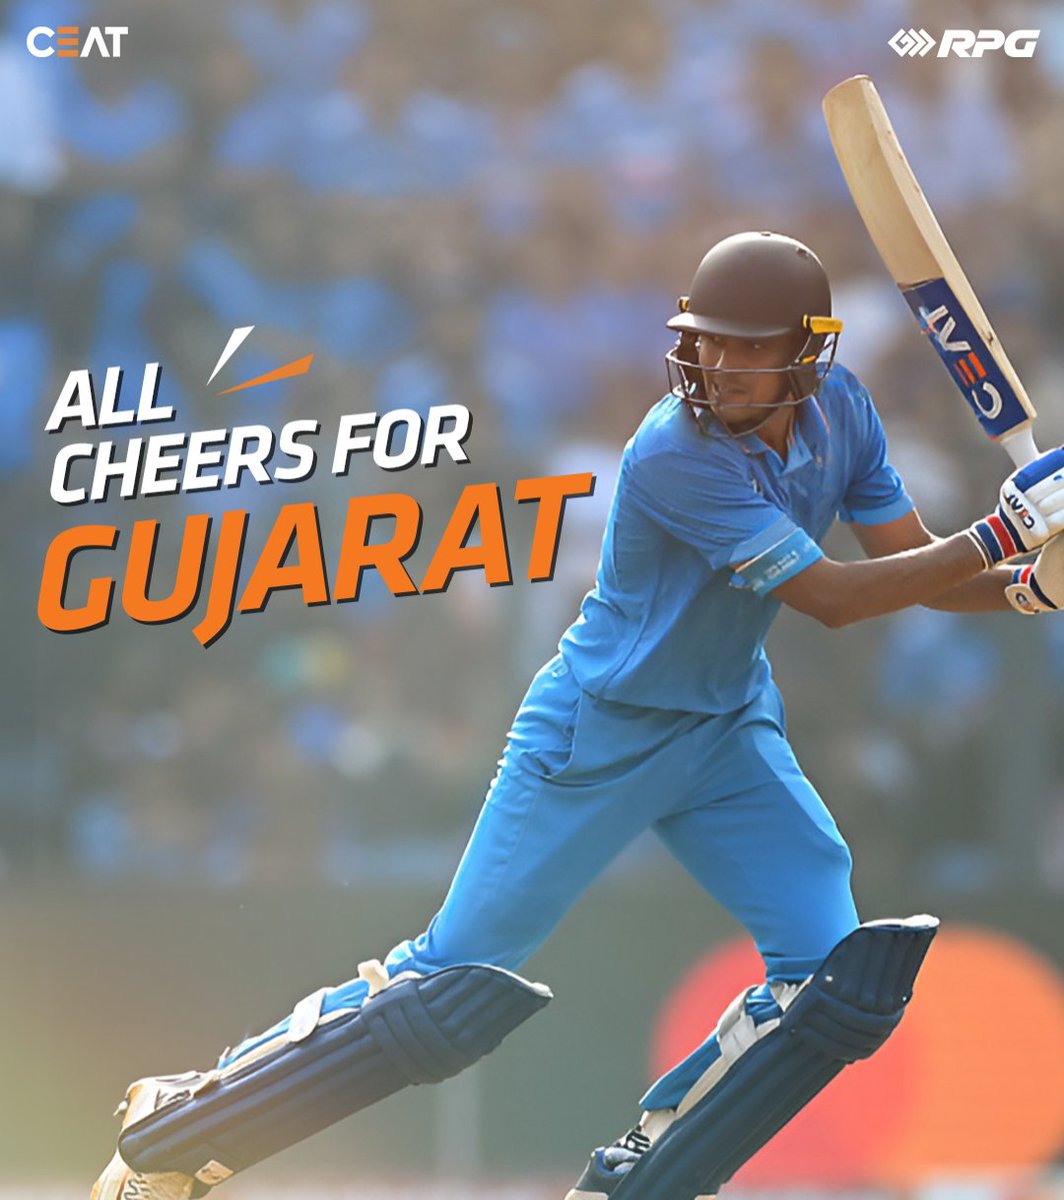 Gujarat shines bright on the field today clinching a well-deserved win! @ShubmanGill #CEAT #CEATTyres #Victory #Gujarat #ShubmanGill #ThisIsRPG